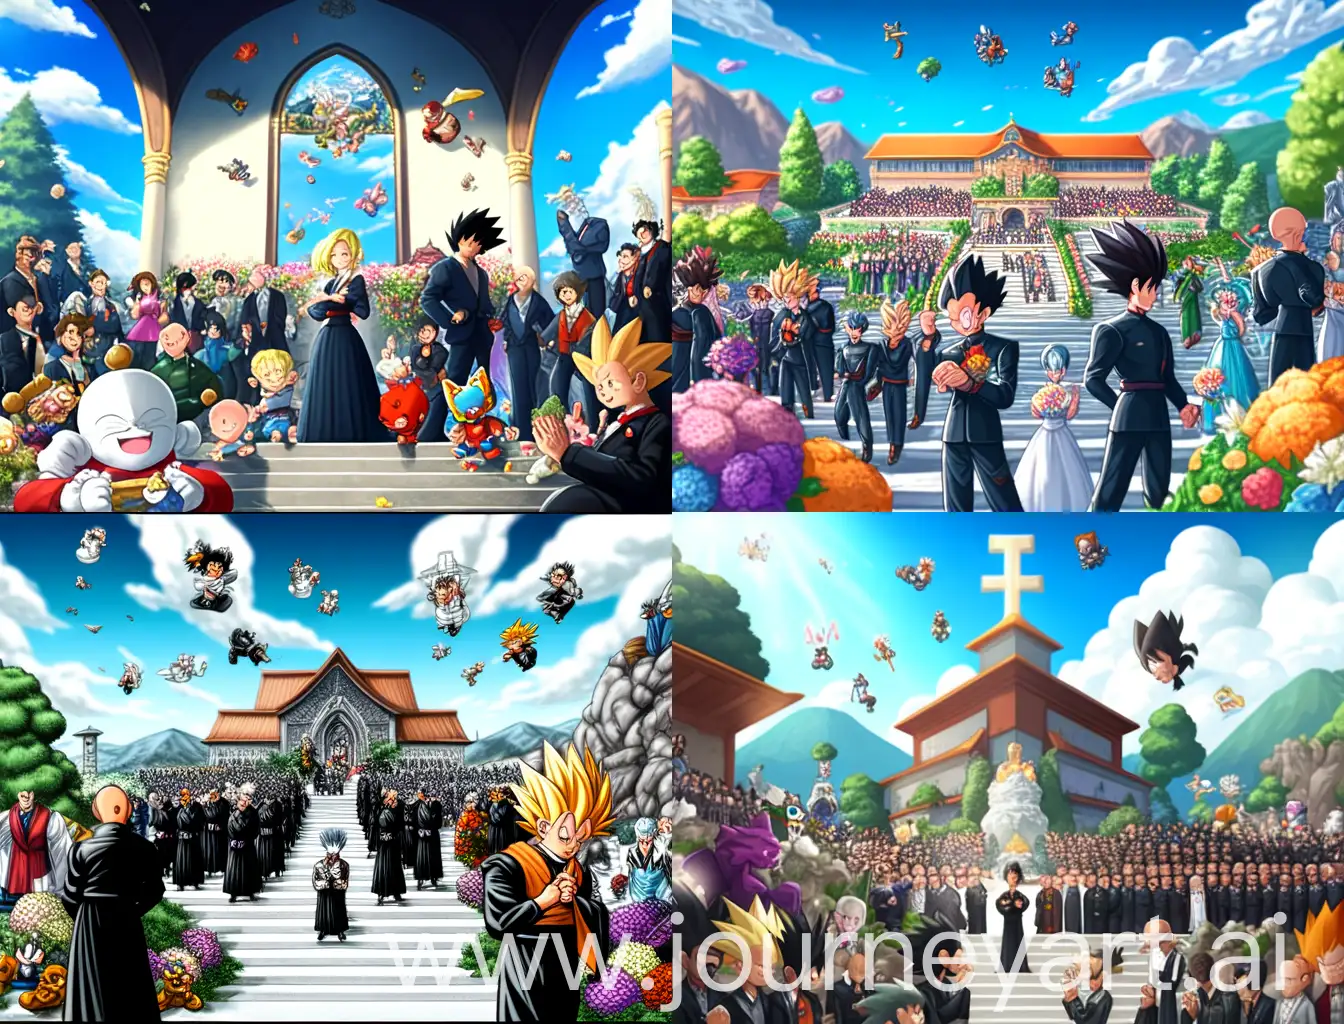 Solemn-Gathering-Funeral-Tribute-by-Iconic-Characters-in-Ming-Style-Church-Setting